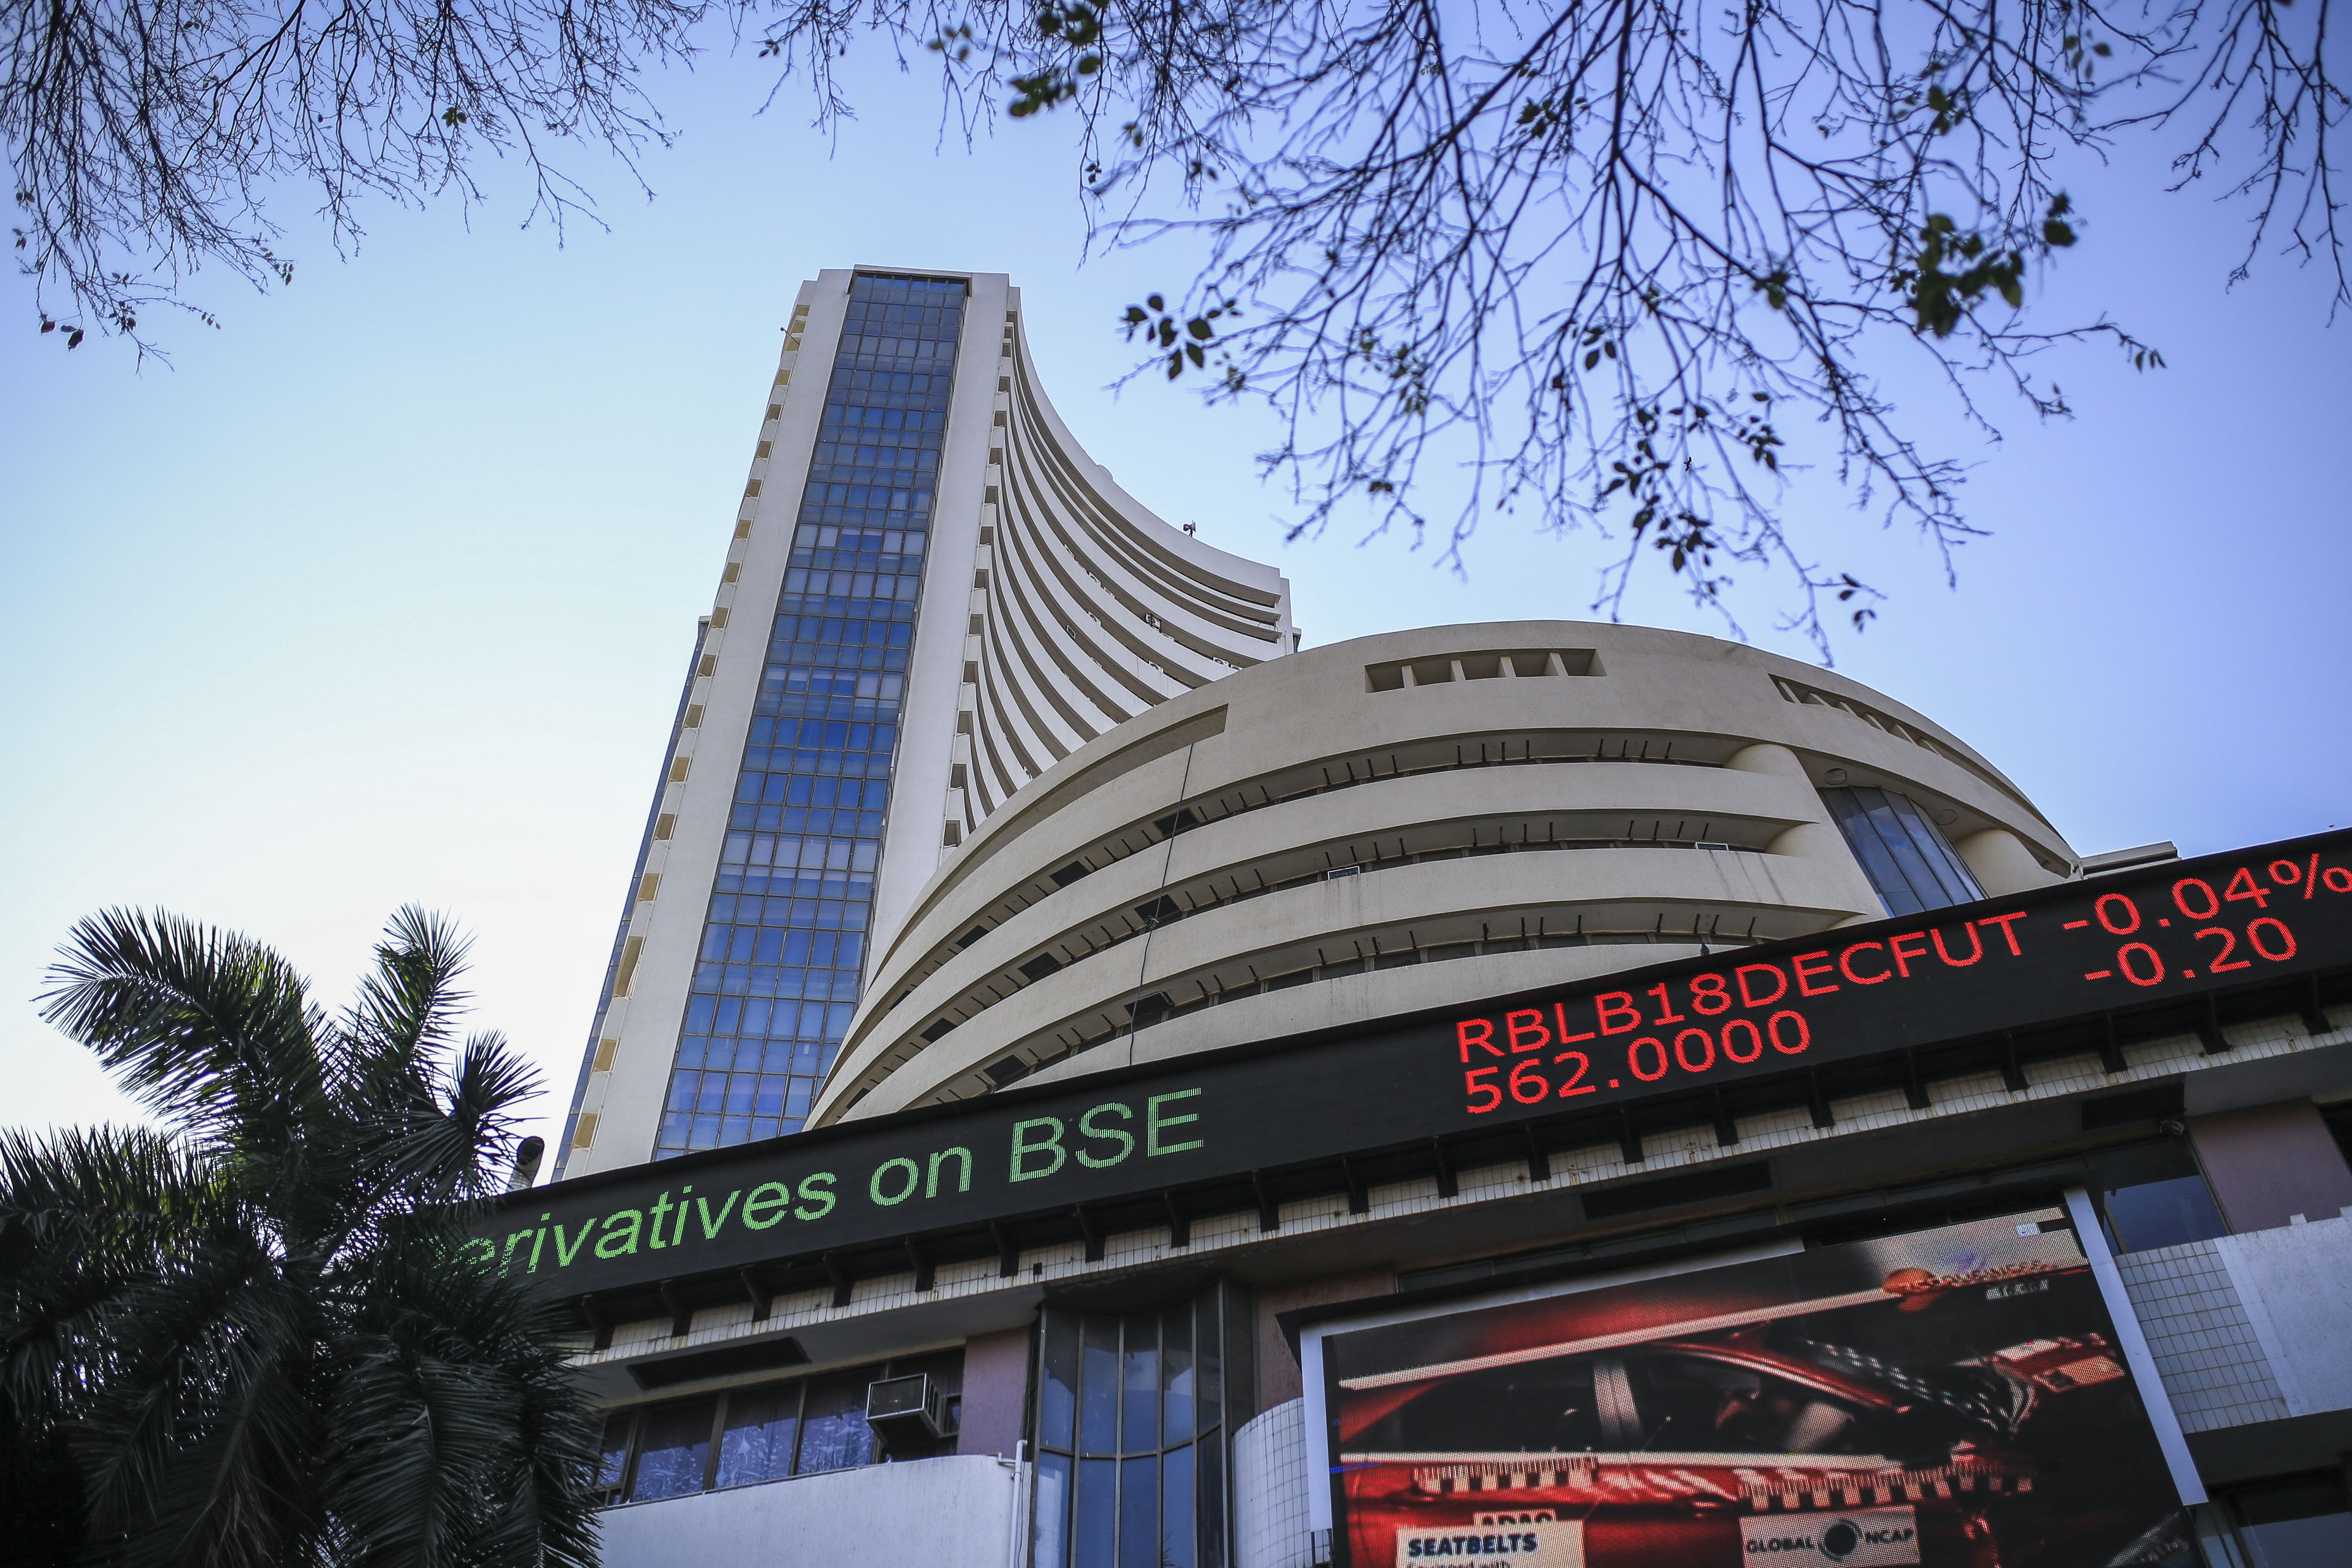 sensex-falls-49246-points-to-5921562-in-early-trade